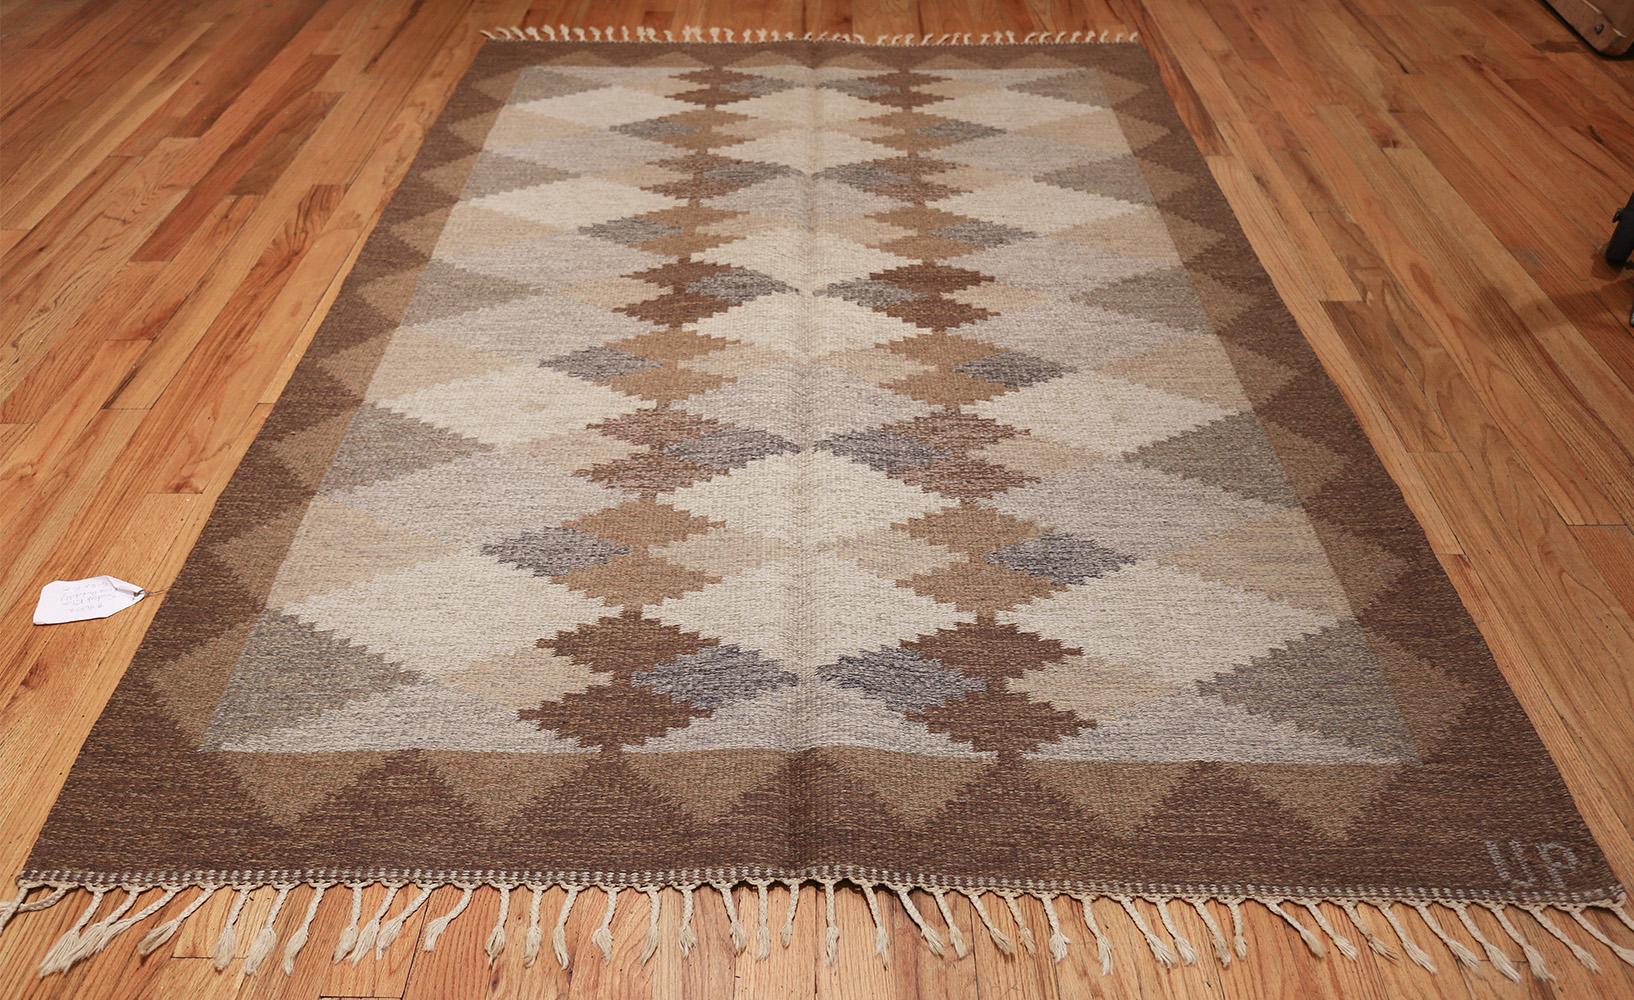 Drawn in a timeless, modern style, this outstanding signed Swedish Kilim features an artful pattern of reticulated lozenges and quarter-rhombus motifs that have an earthy masculine countenance. The beautifully decorated field showcases an exquisite